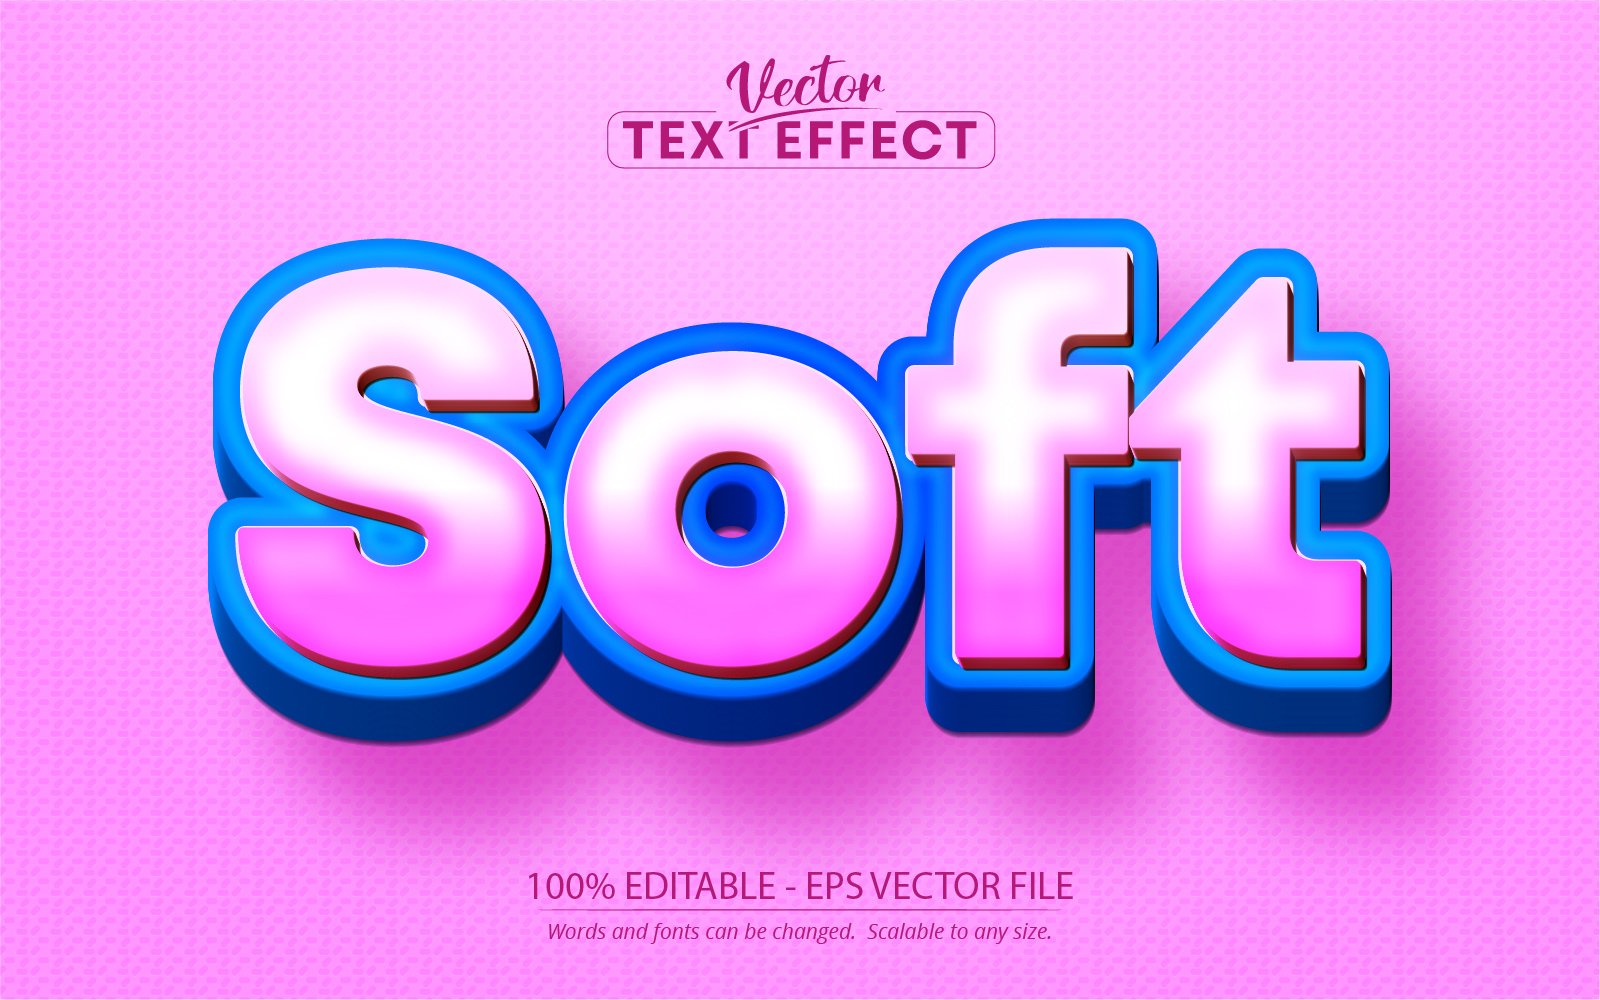 Soft - Editable Text Effect, Pink And Blue Cartoon Text Style, Graphics Illustration